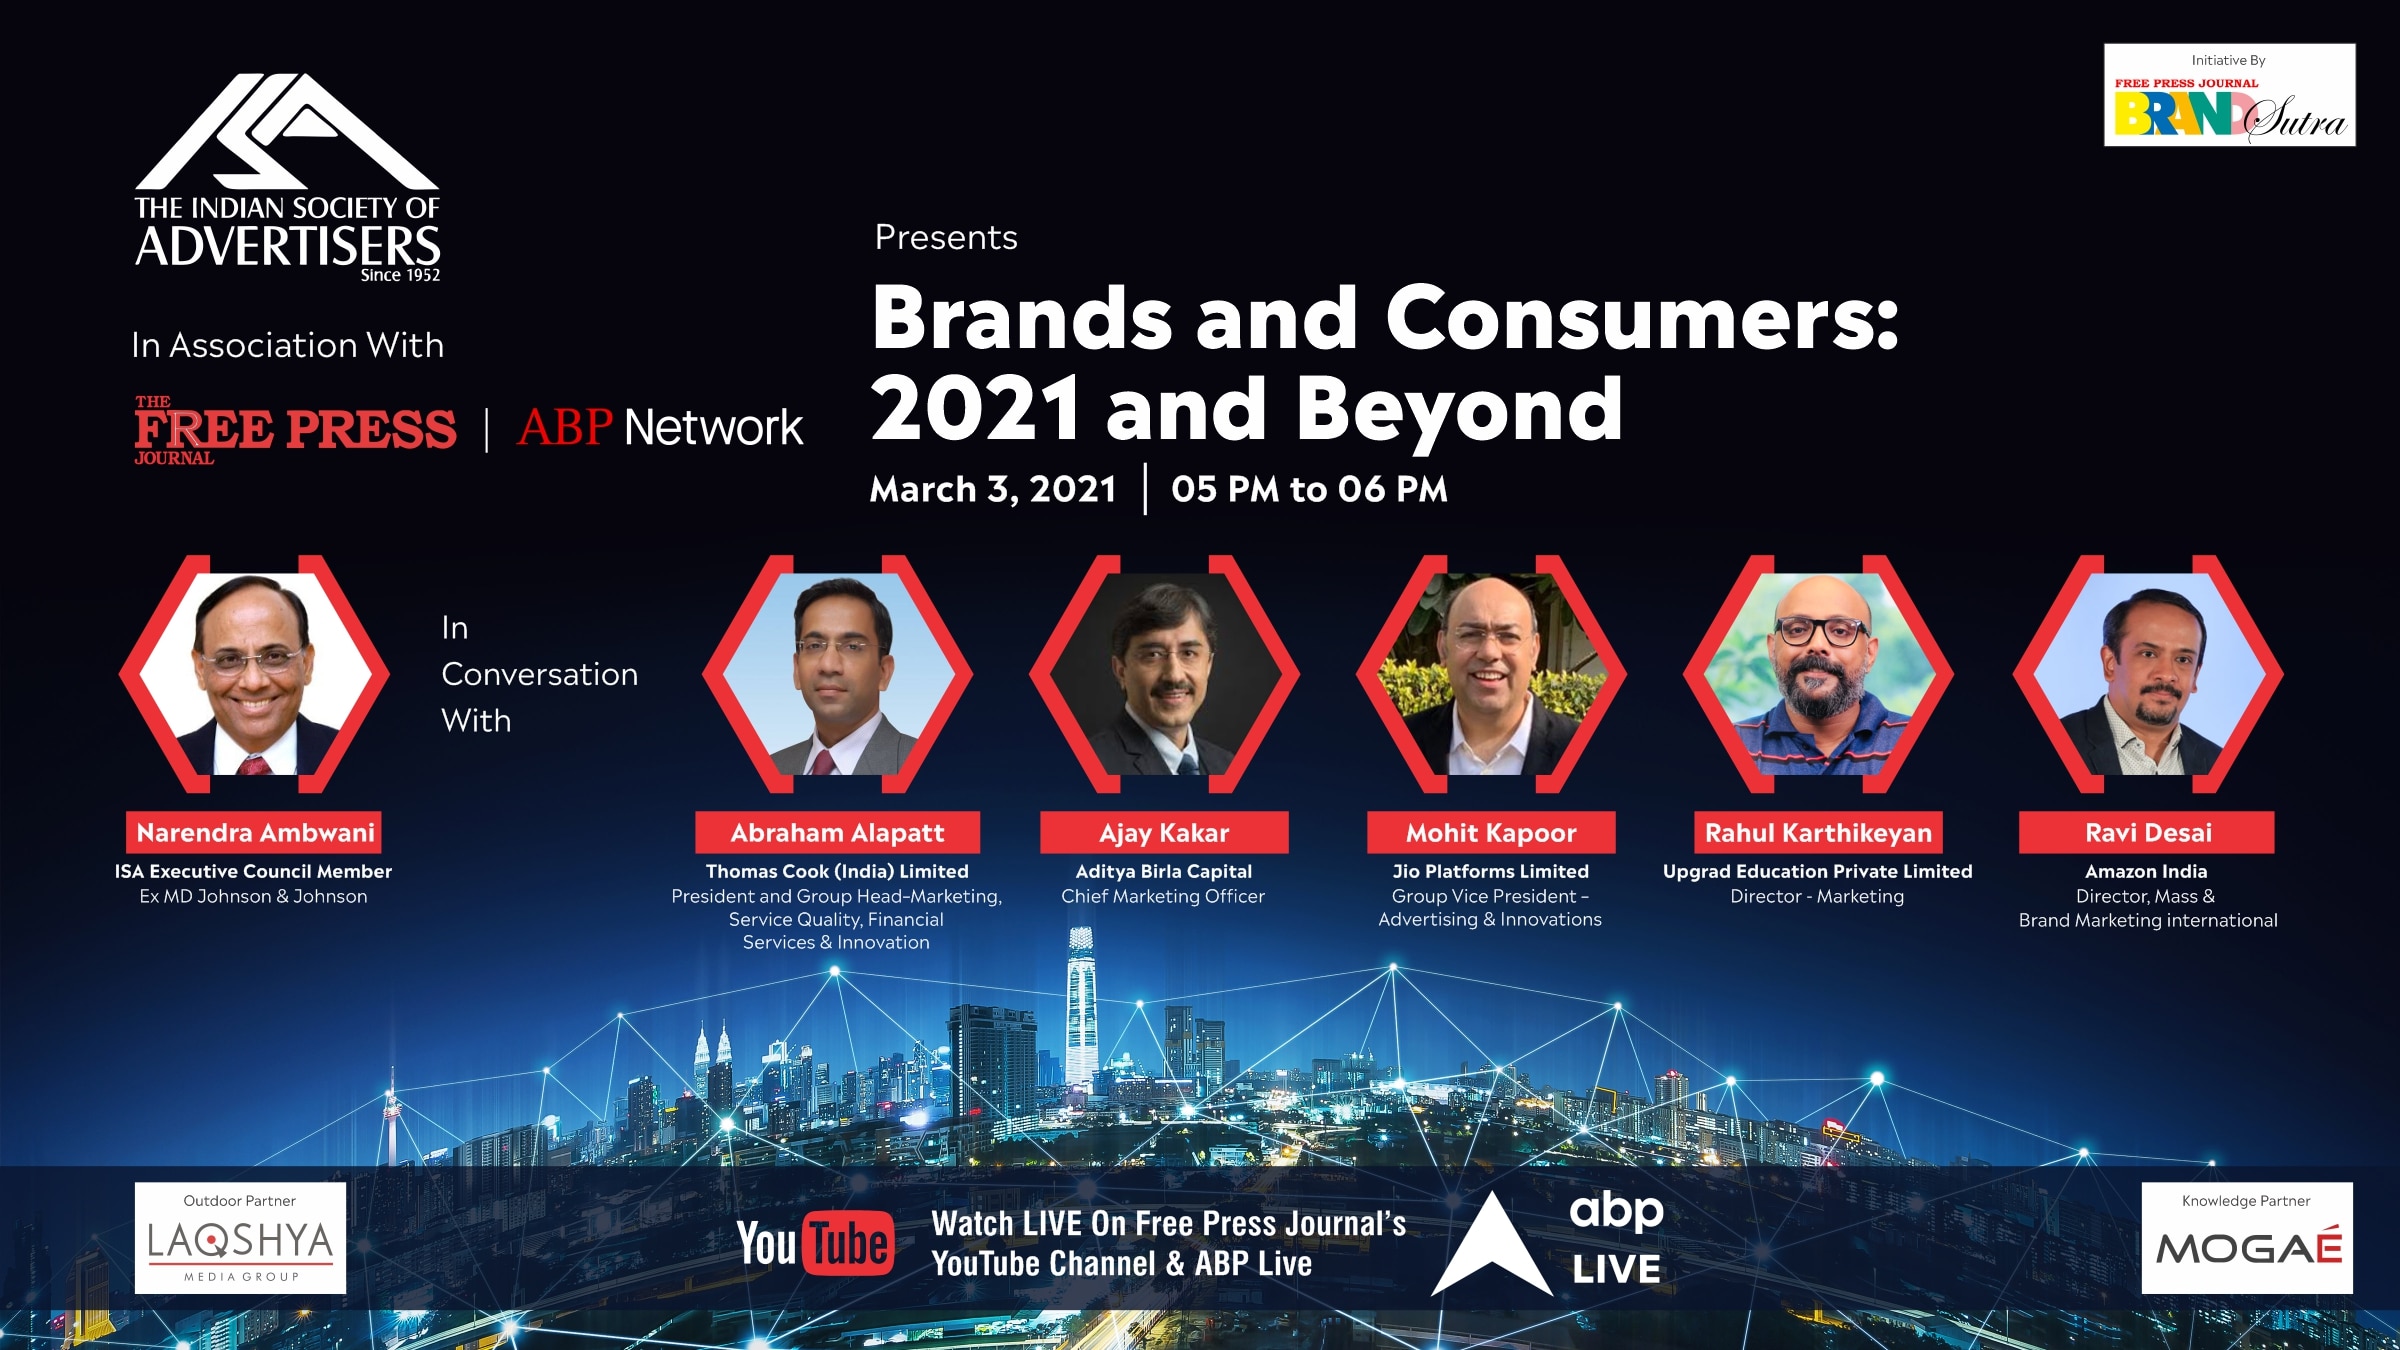 Brands and Consumers: 2021 And Beyond | ISA To Hold Webinar With ABP Network And FPJ